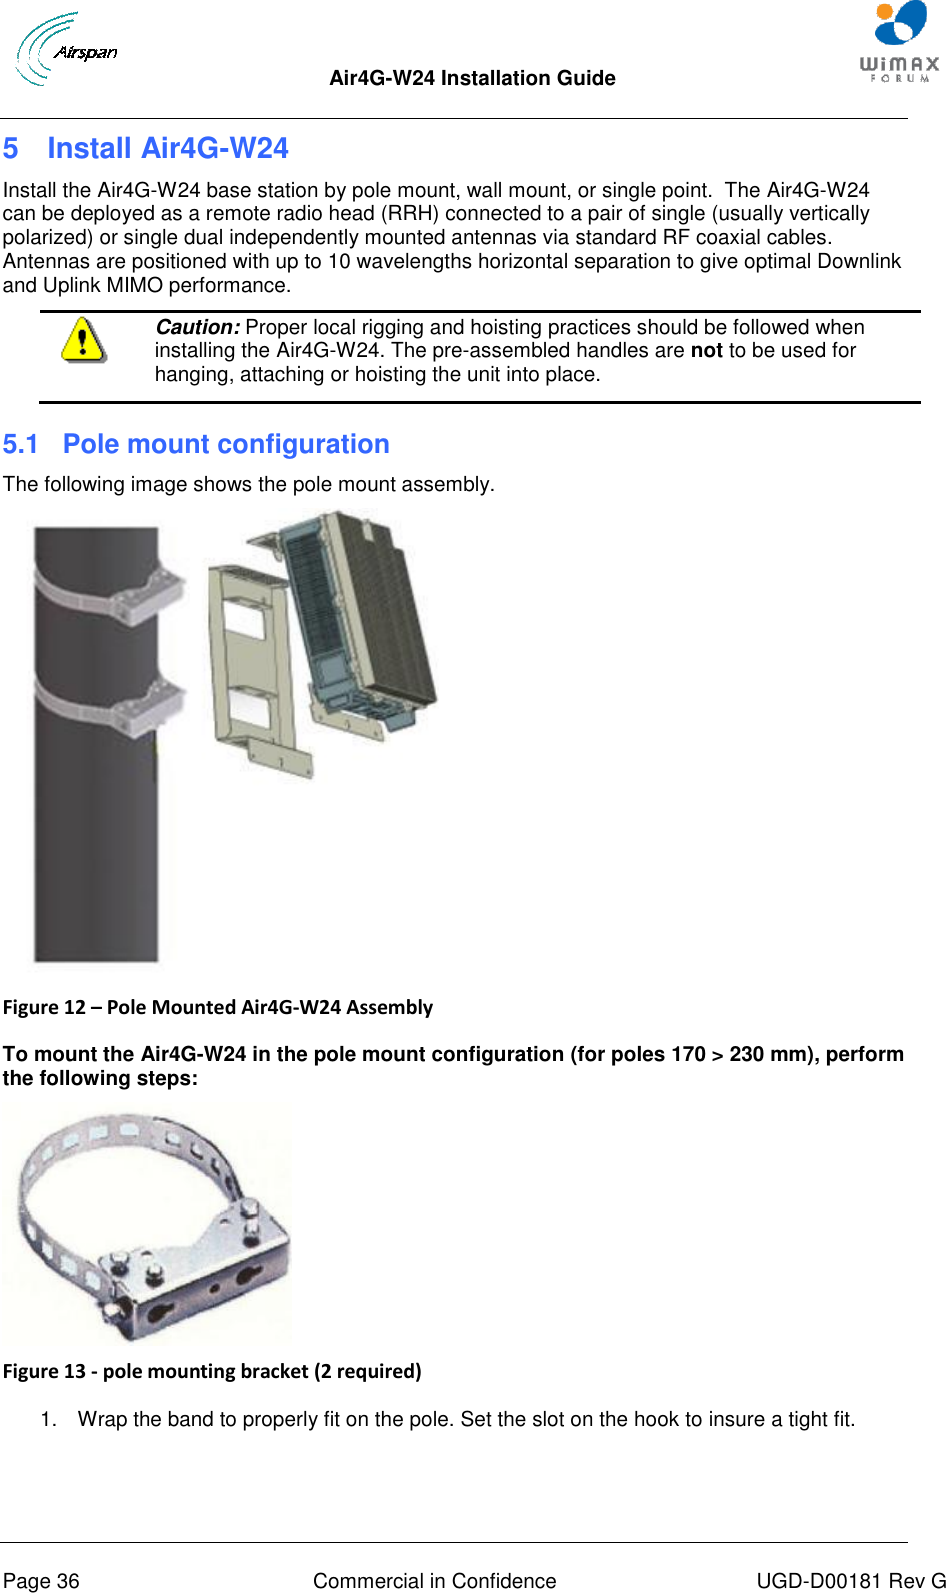  Air4G-W24 Installation Guide       Page 36  Commercial in Confidence  UGD-D00181 Rev G 5  Install Air4G-W24 Install the Air4G-W24 base station by pole mount, wall mount, or single point.  The Air4G-W24 can be deployed as a remote radio head (RRH) connected to a pair of single (usually vertically polarized) or single dual independently mounted antennas via standard RF coaxial cables.  Antennas are positioned with up to 10 wavelengths horizontal separation to give optimal Downlink and Uplink MIMO performance.  Caution: Proper local rigging and hoisting practices should be followed when installing the Air4G-W24. The pre-assembled handles are not to be used for hanging, attaching or hoisting the unit into place.  5.1  Pole mount configuration The following image shows the pole mount assembly.  Figure 12 – Pole Mounted Air4G-W24 Assembly  To mount the Air4G-W24 in the pole mount configuration (for poles 170 &gt; 230 mm), perform the following steps:  Figure 13 - pole mounting bracket (2 required)  1.  Wrap the band to properly fit on the pole. Set the slot on the hook to insure a tight fit. 